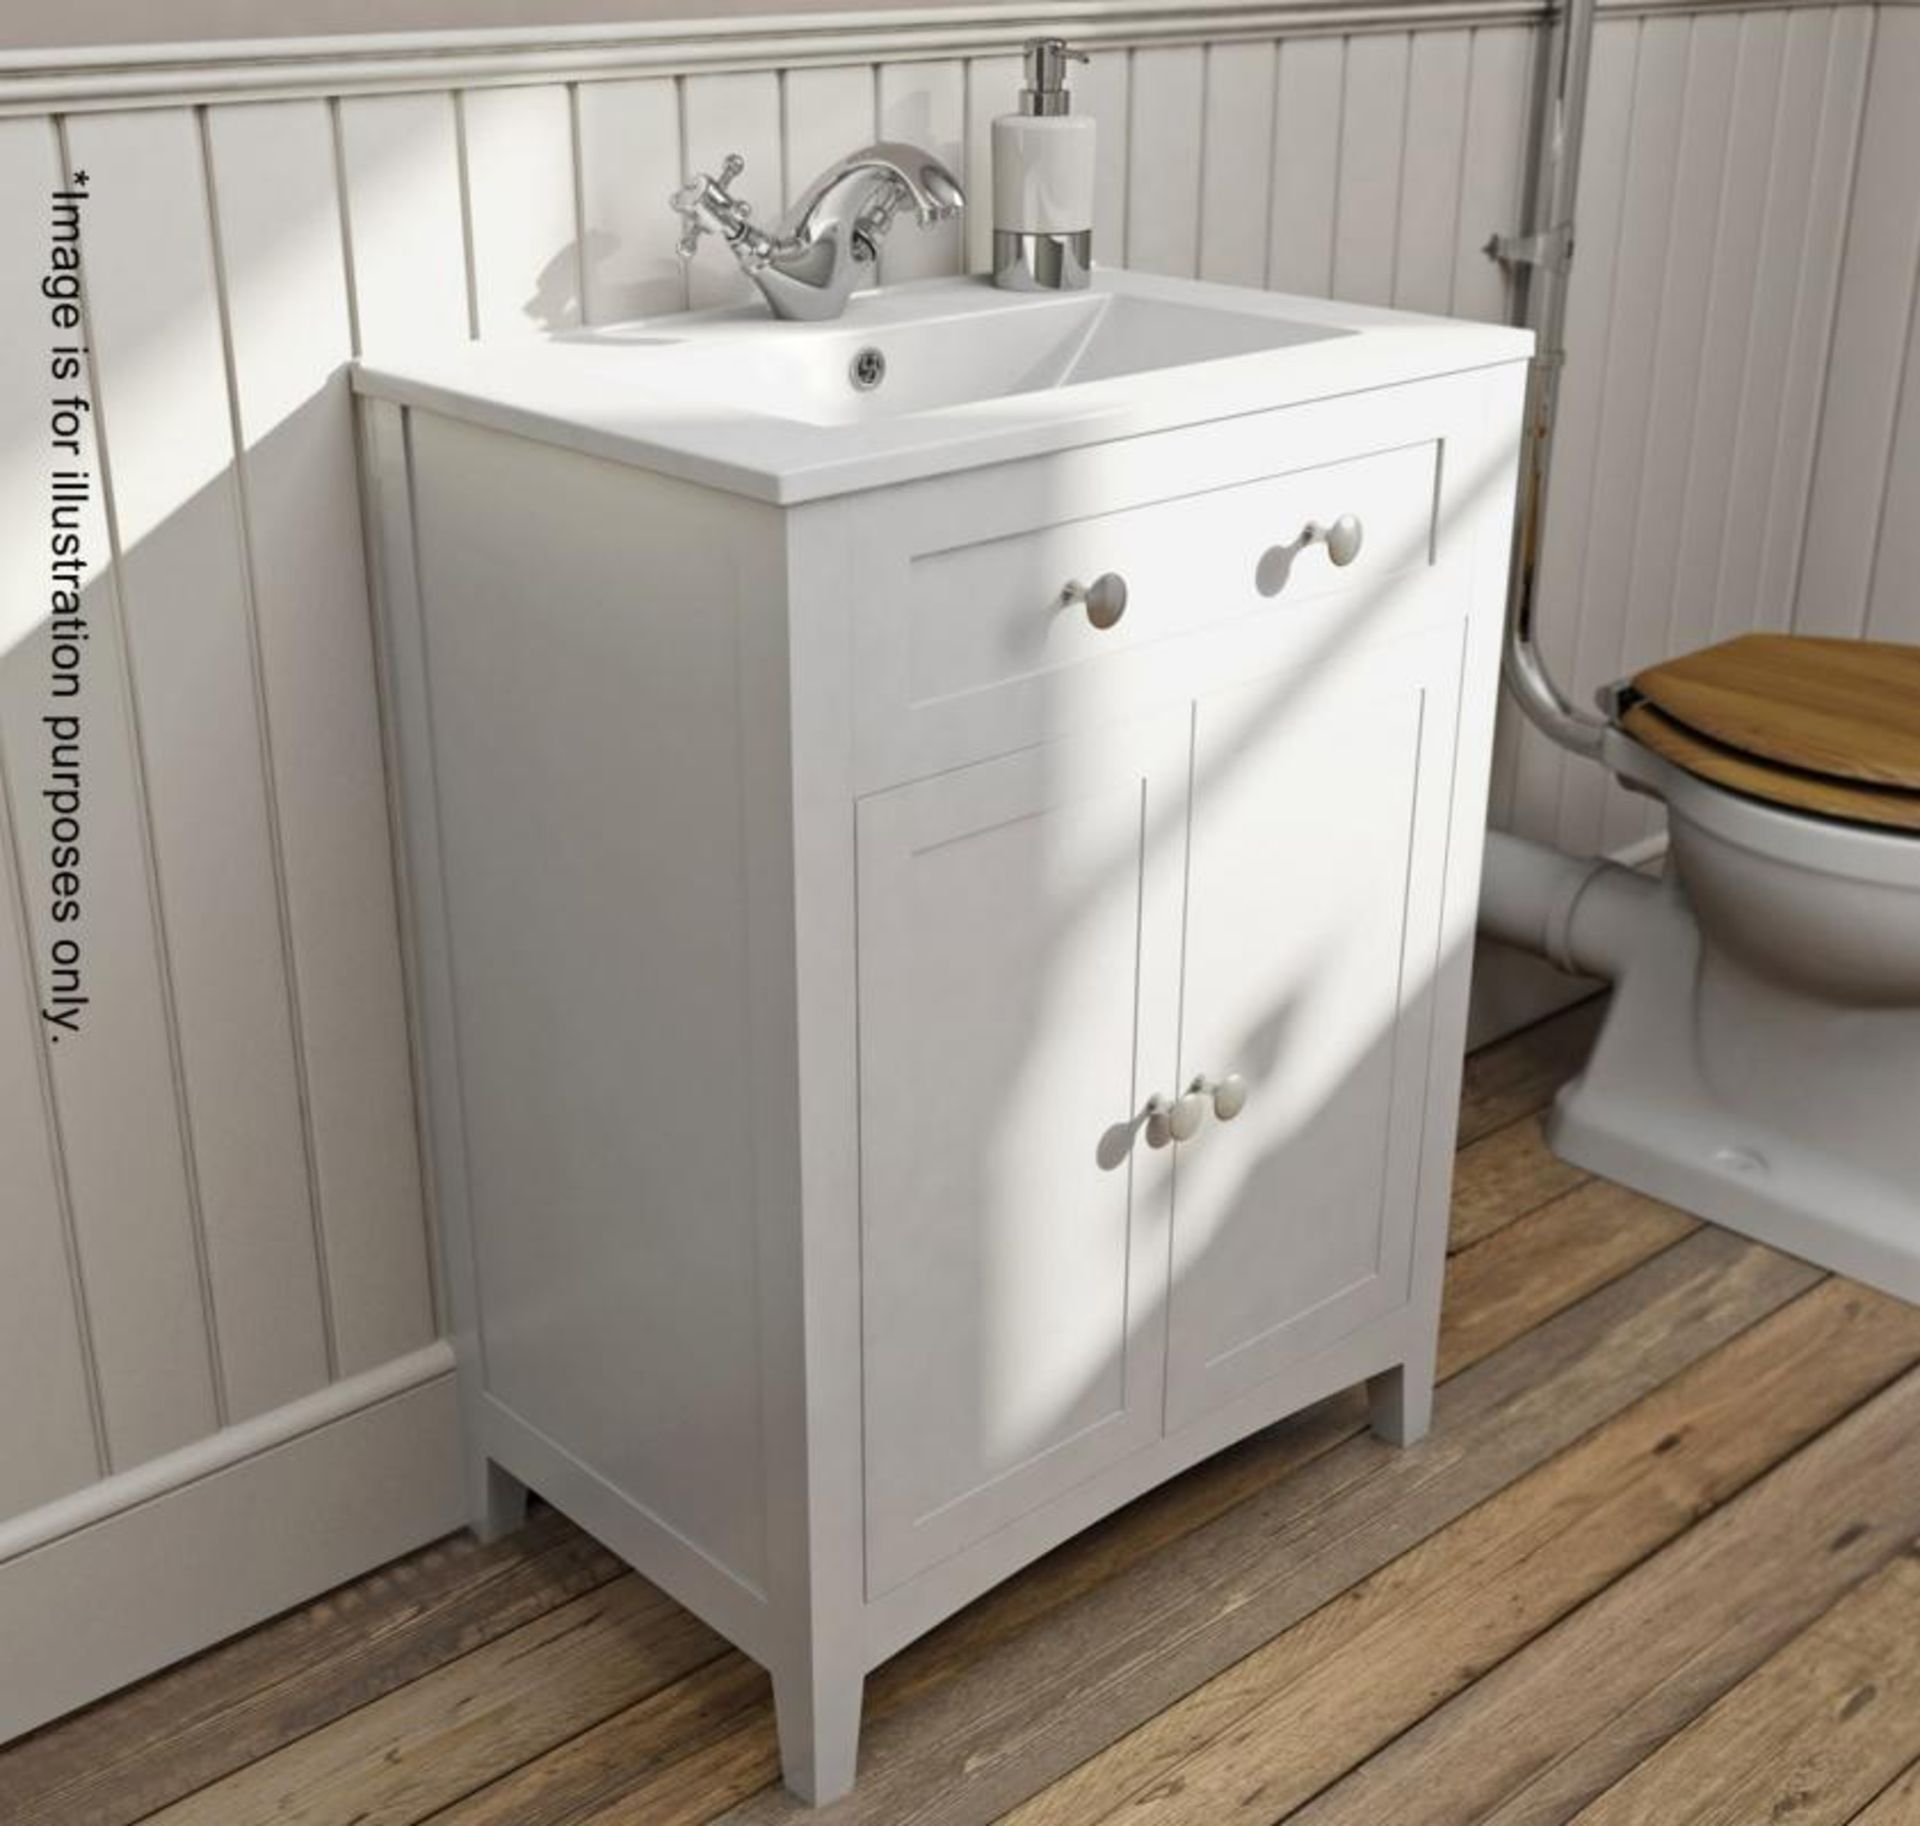 1 x Camberley 600 2-Drawer Soft Close Vanity Unit In White - New / Unused Stock - Dimensions: W60 x